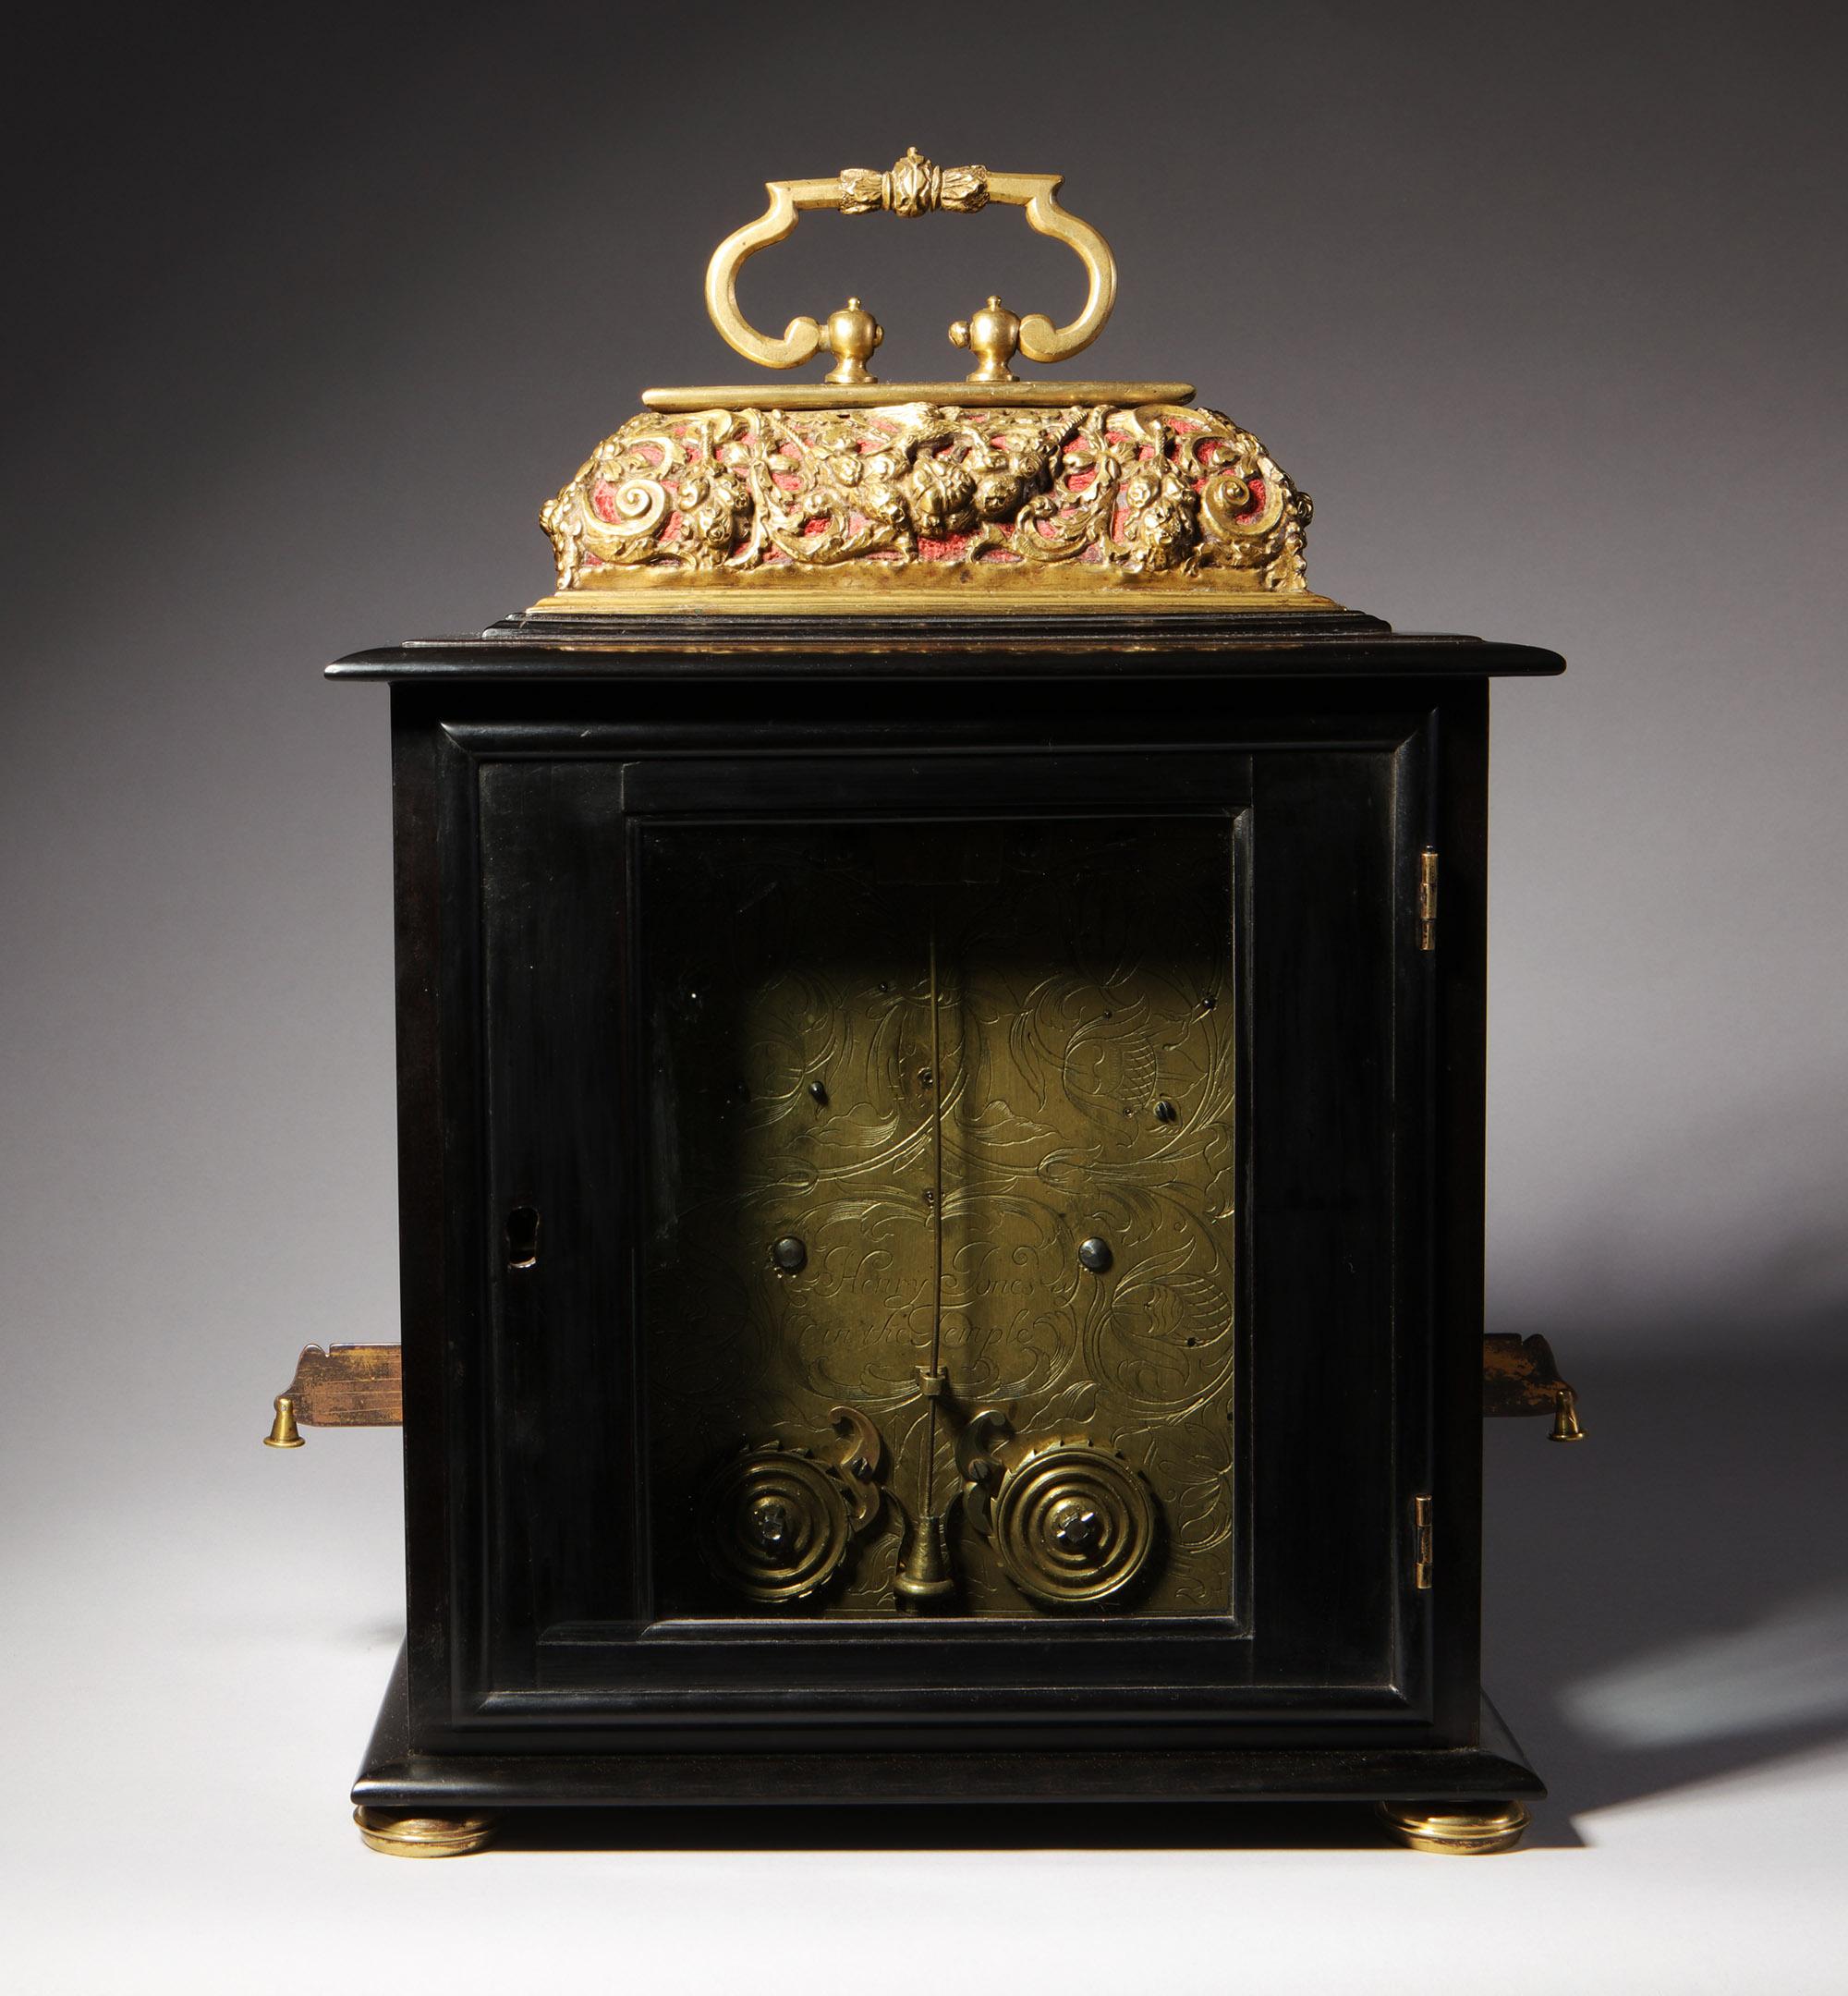 A Rare and Important Charles II 17th Century Table Clock by Henry Jones For Sale 2